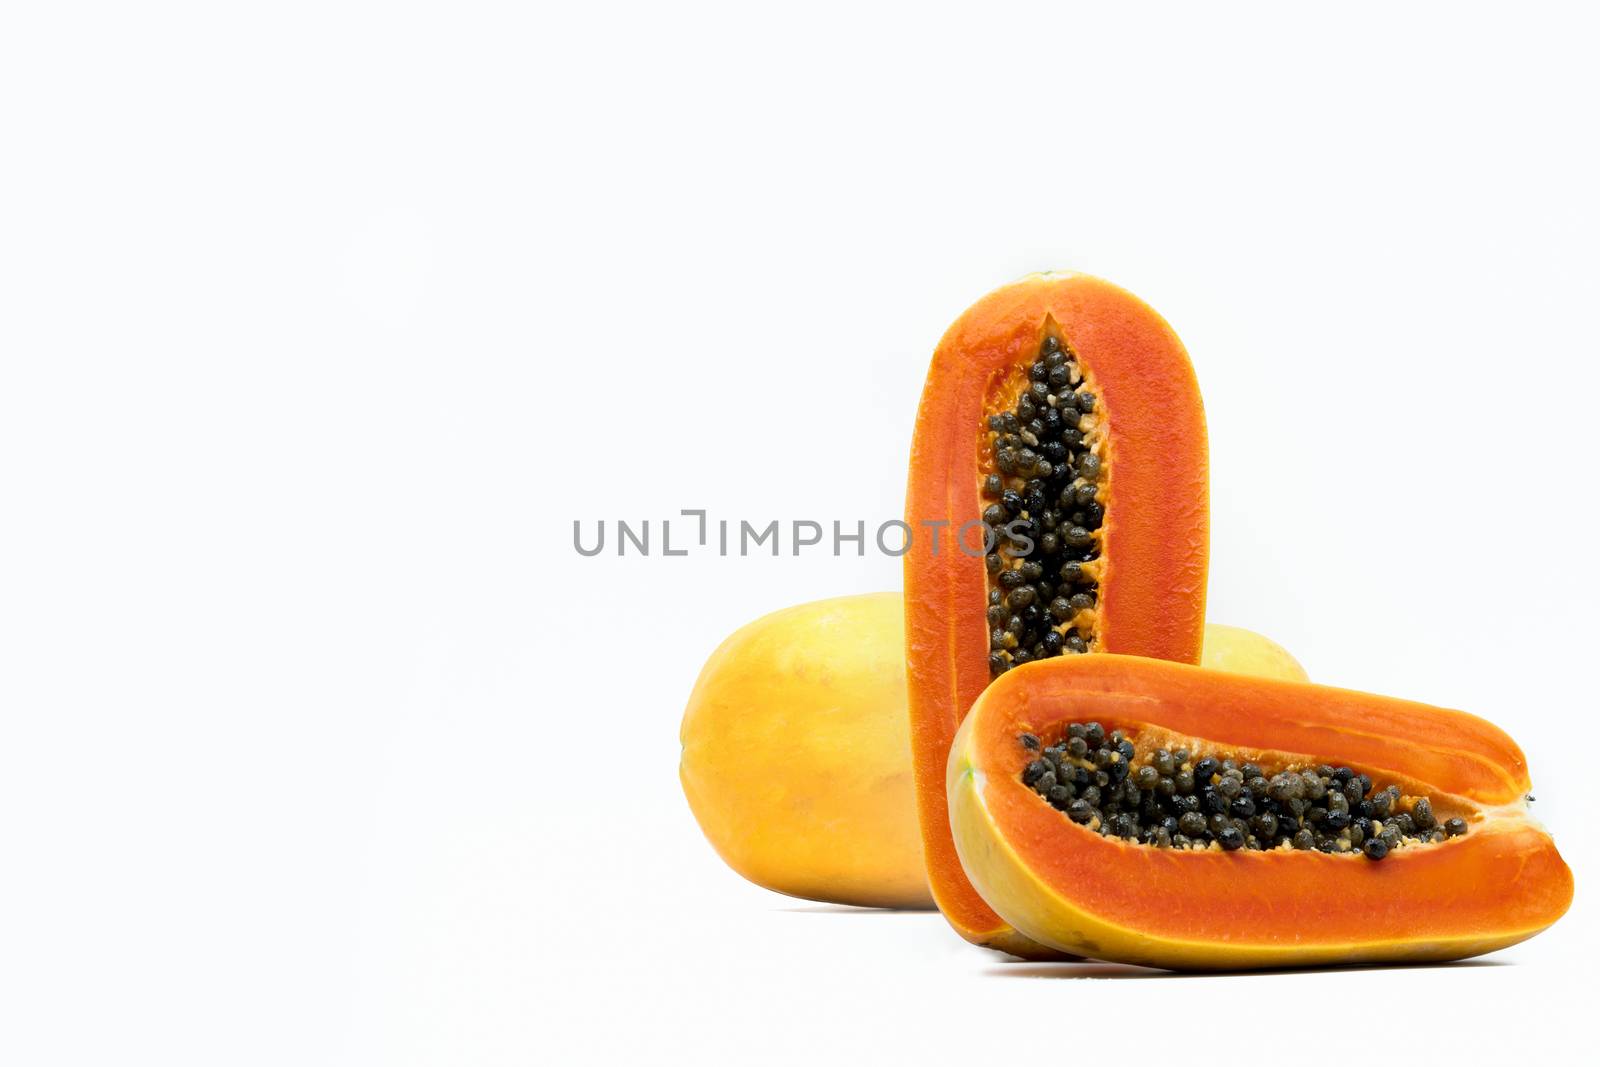 Whole and half of ripe papaya fruit with seeds isolated on white background with copy space. Natural source of vitamin C, folate and minerals. Healthy food for pregnant and breast feeding woman